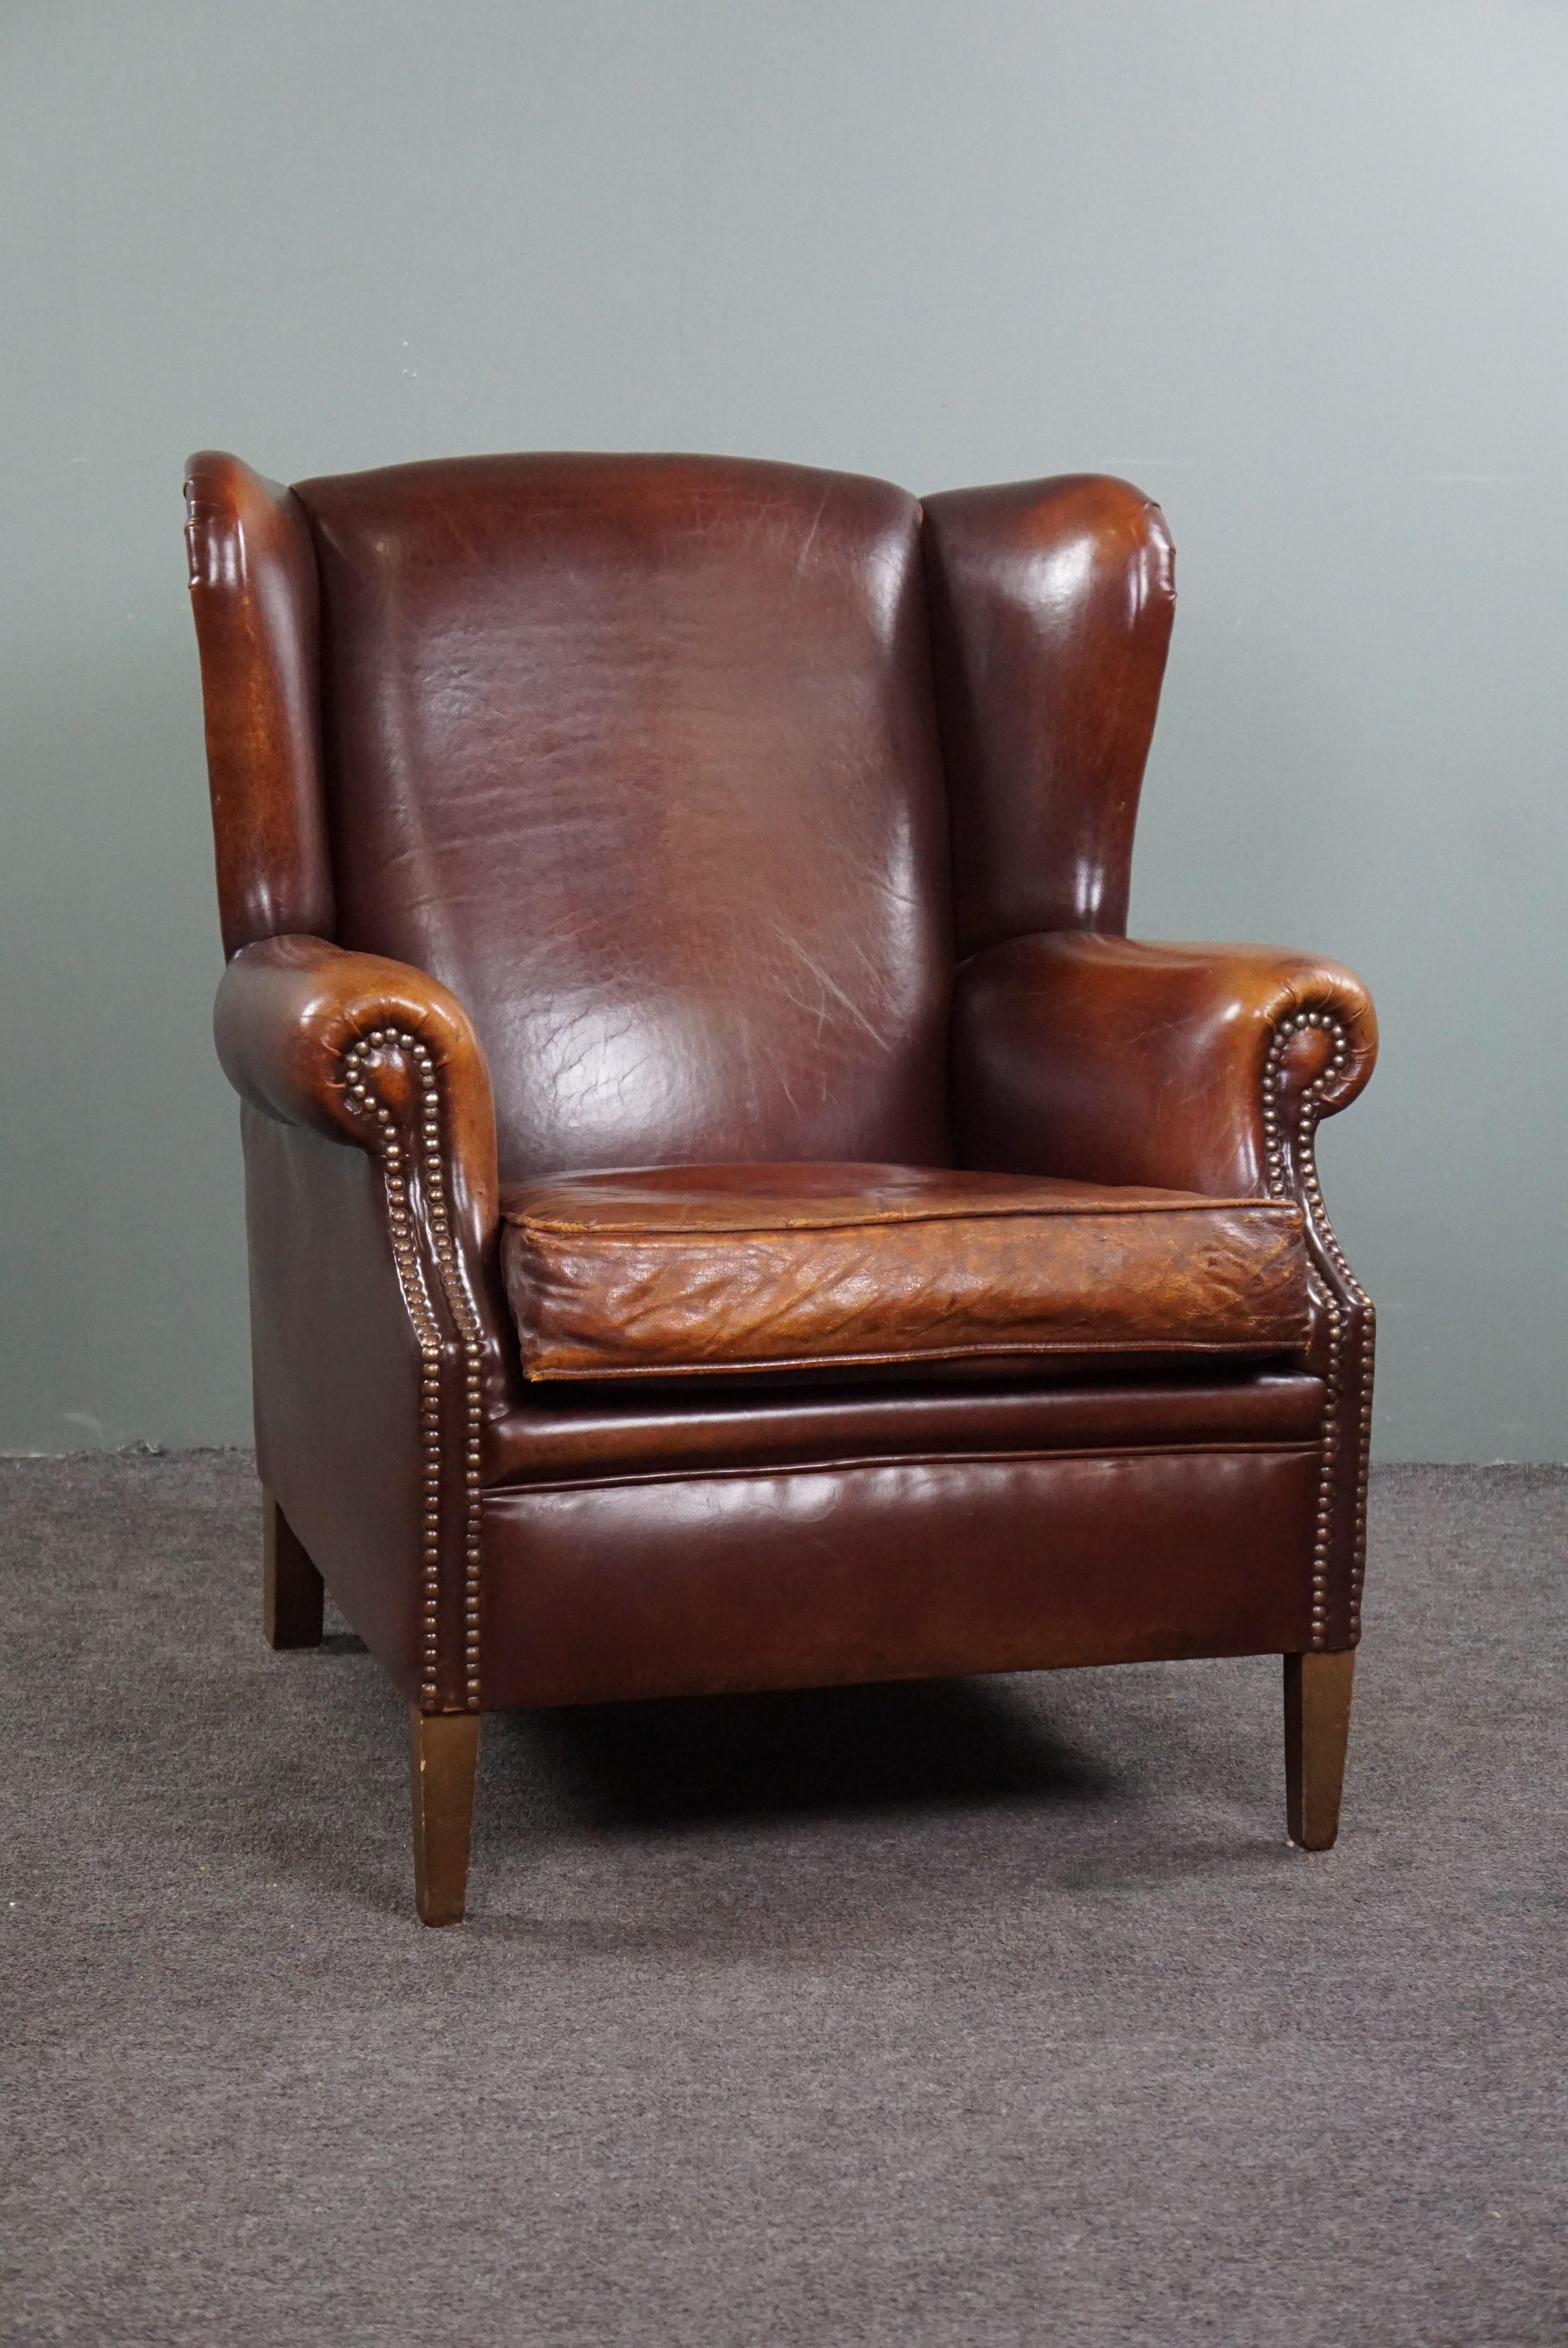 Offered this beautiful sheep leather wing chair finished with beautiful decorative nails.

This pearl has a beautiful warm color and a beautiful patina.
Anyone who takes this unique eye-catcher into their home is assured of a wonderfully seated and